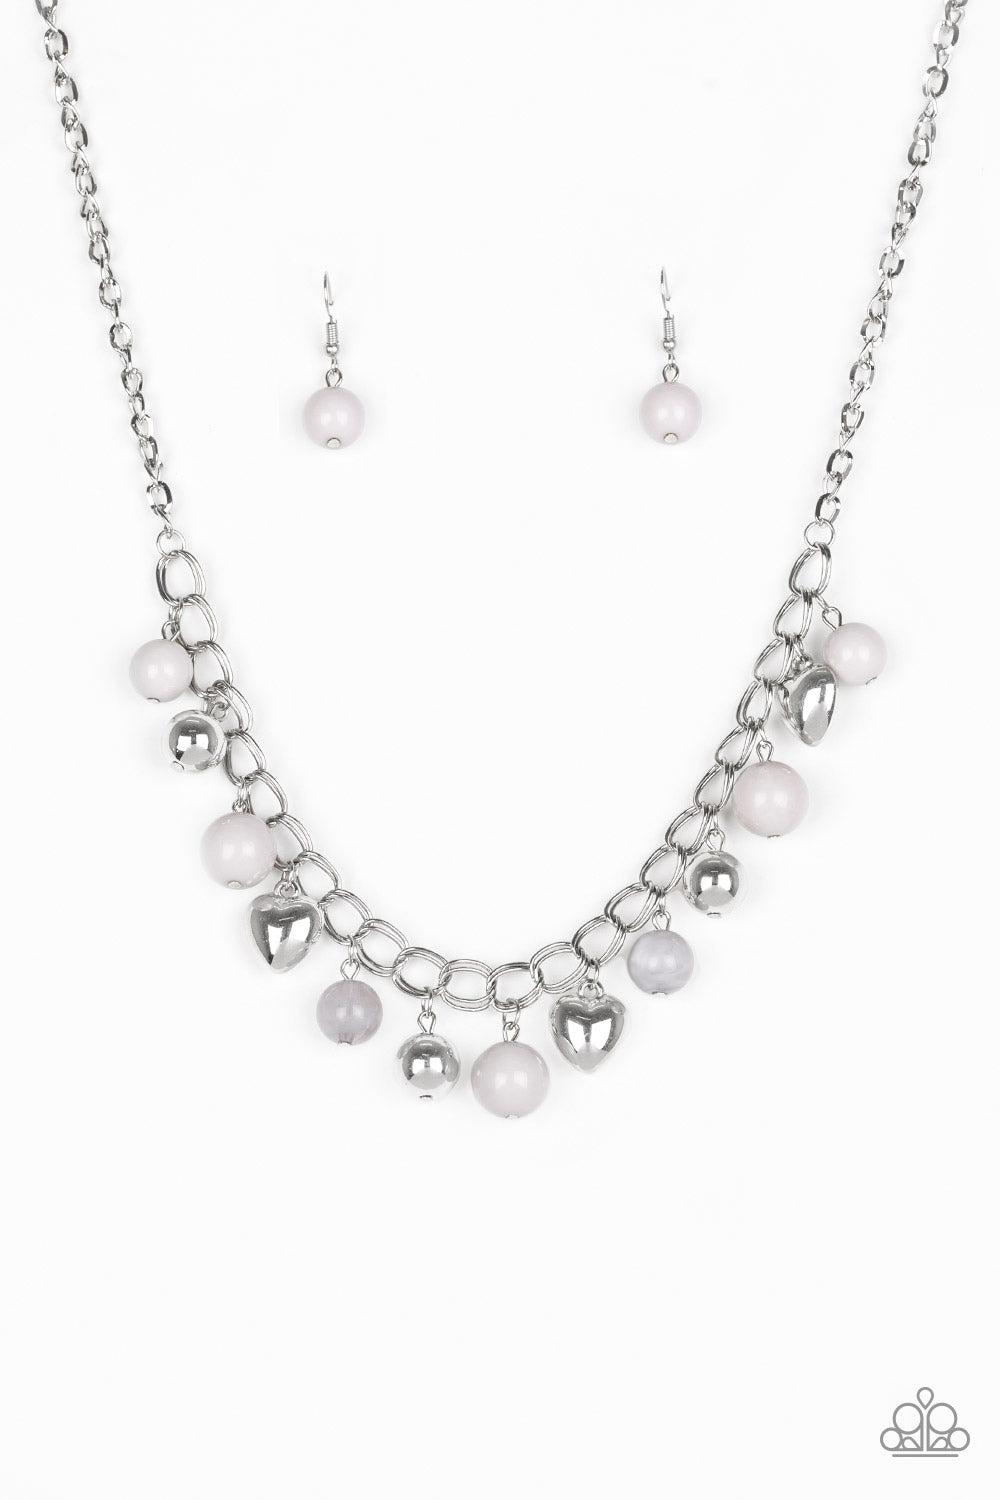 Summer Fling - Silver - Necklace - Paparazzi Accessories